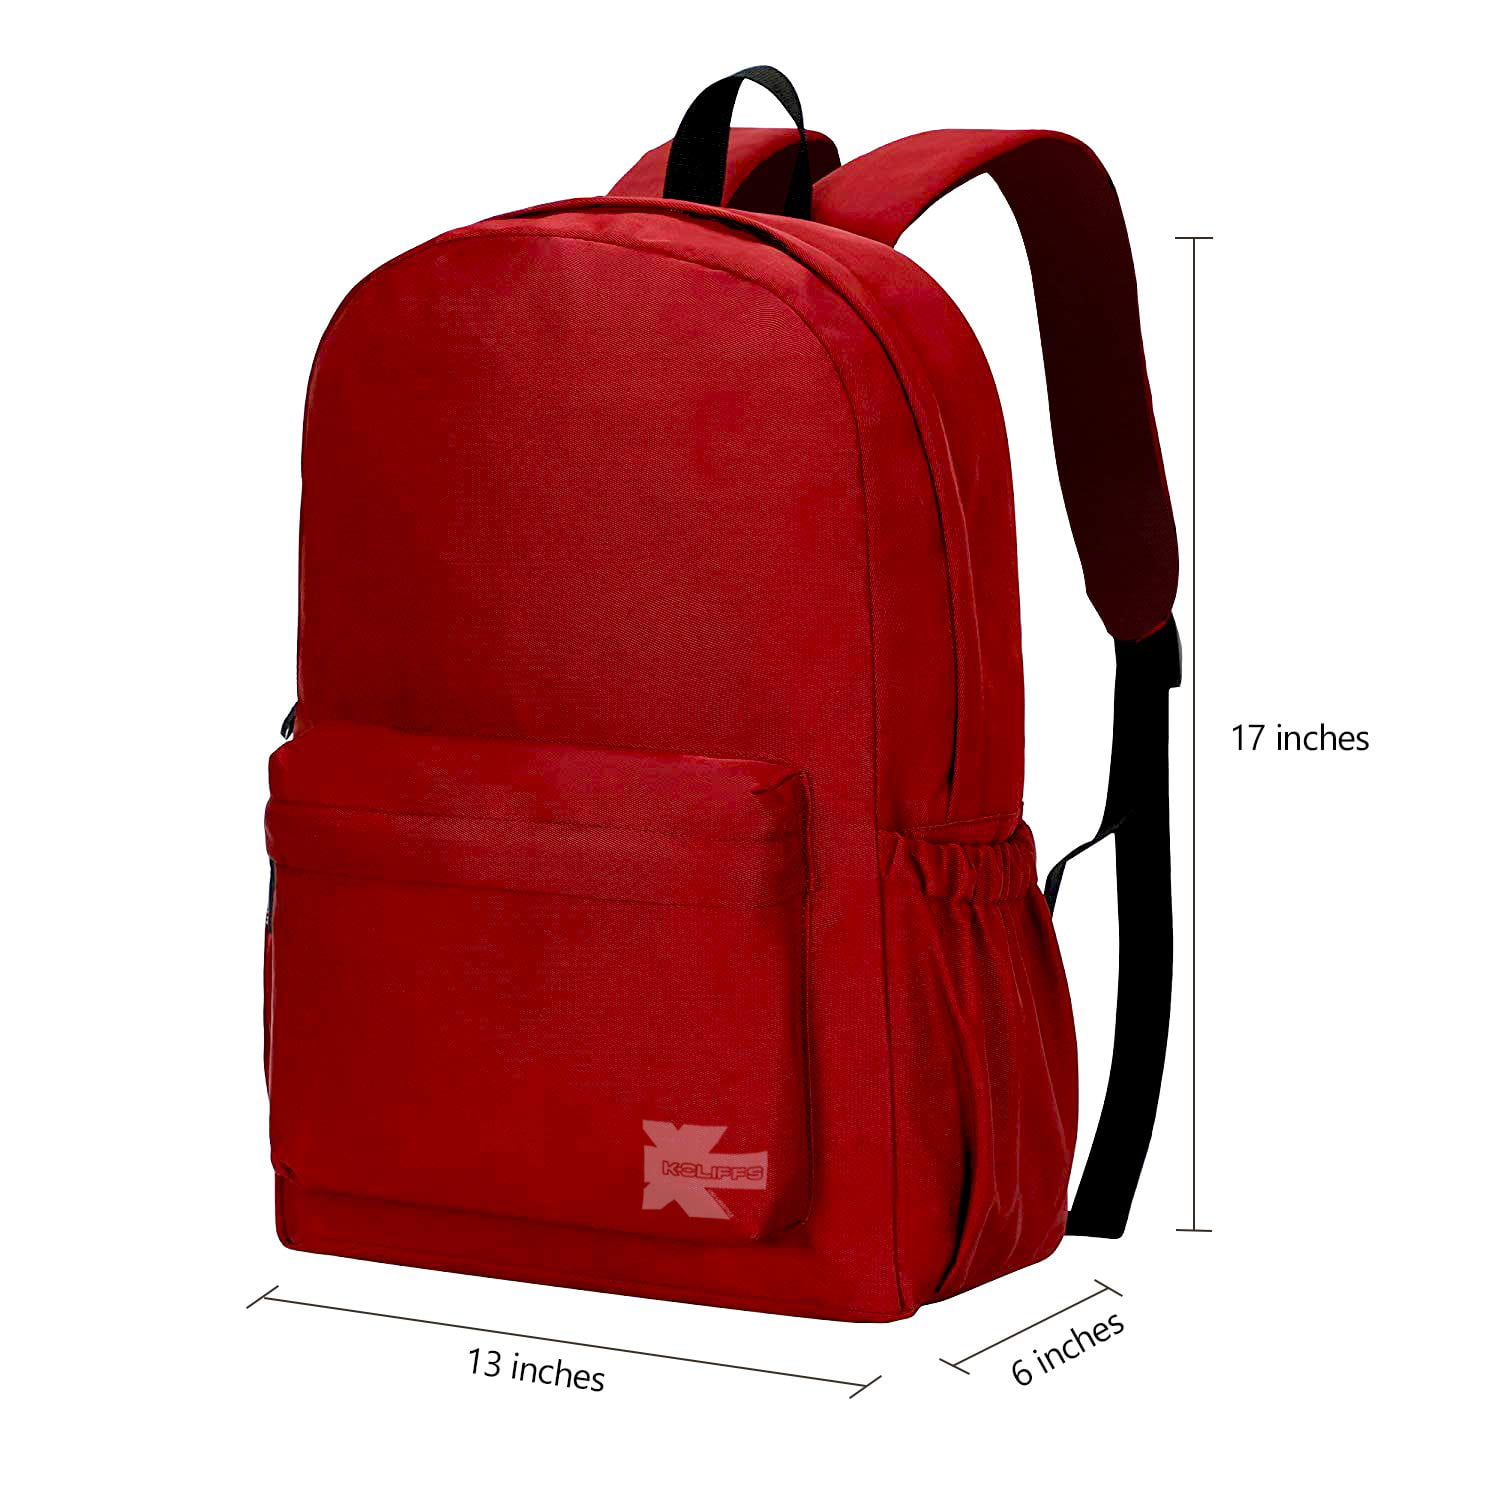 Case Lot 40pc Simple/Basic 16in Backpack, Unisex Student Book bag, Red,  K-Cliffs 